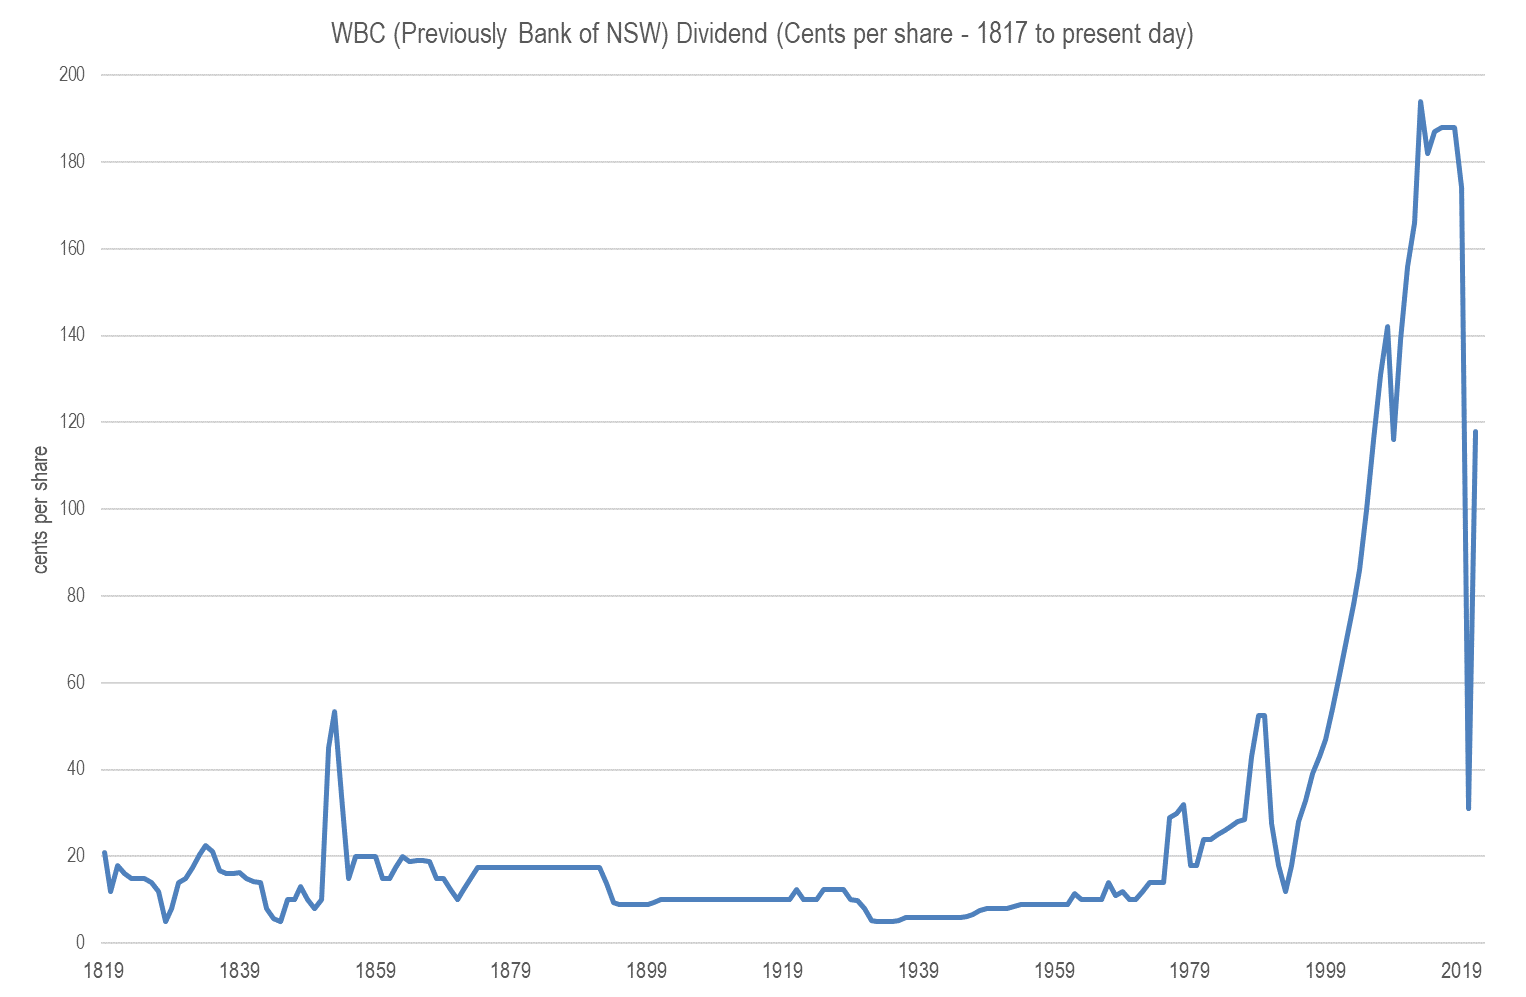 This chart shows the bank’s dividend payments since 1817.